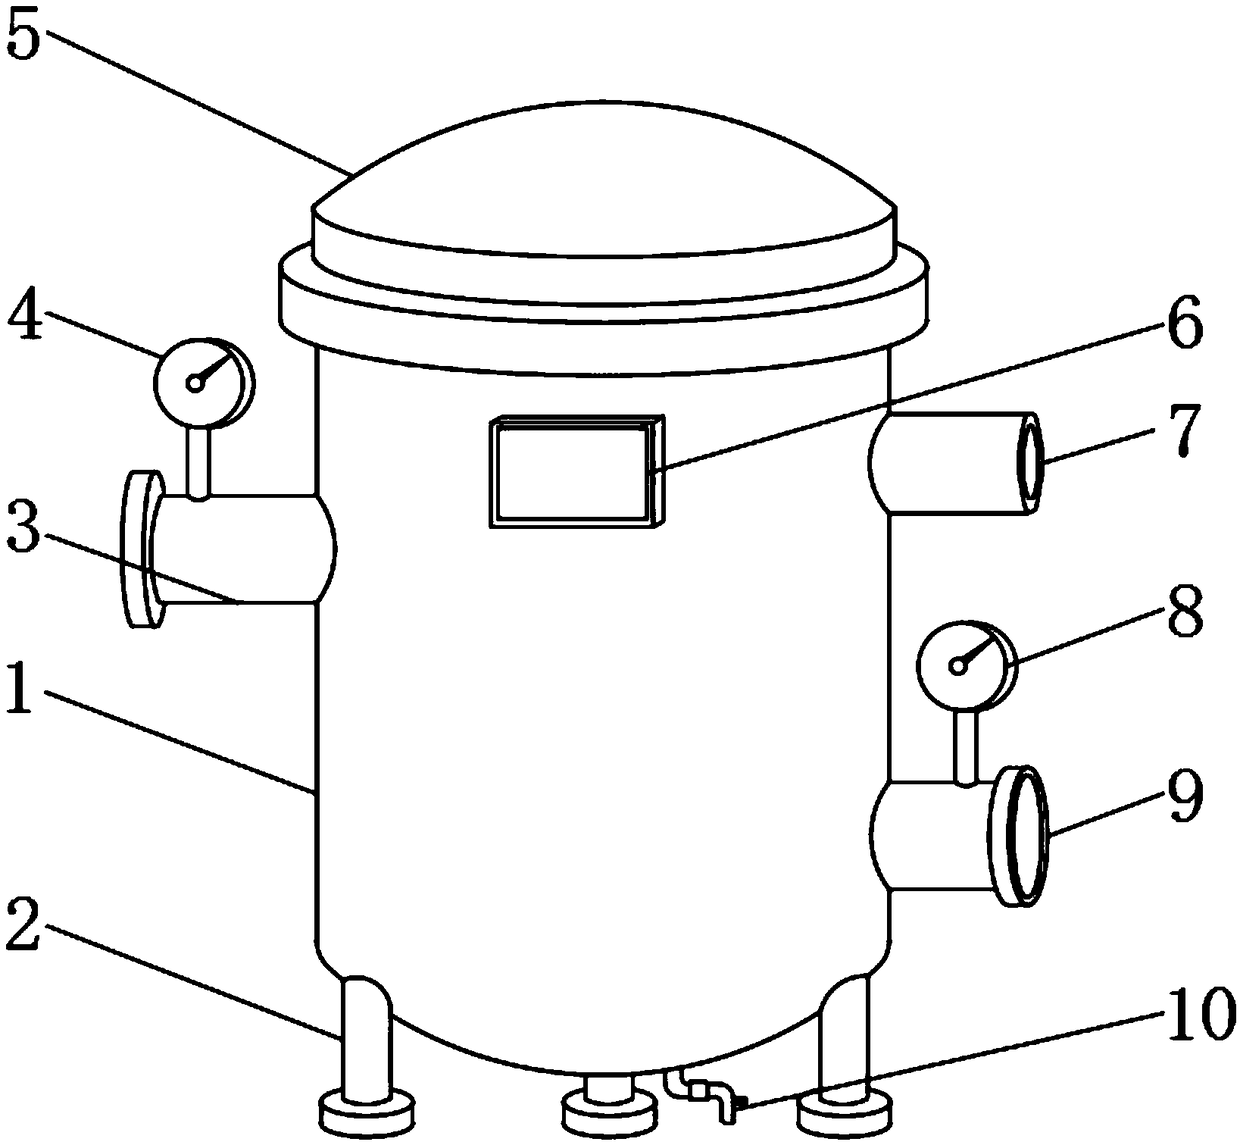 Chemical sewage filtering device